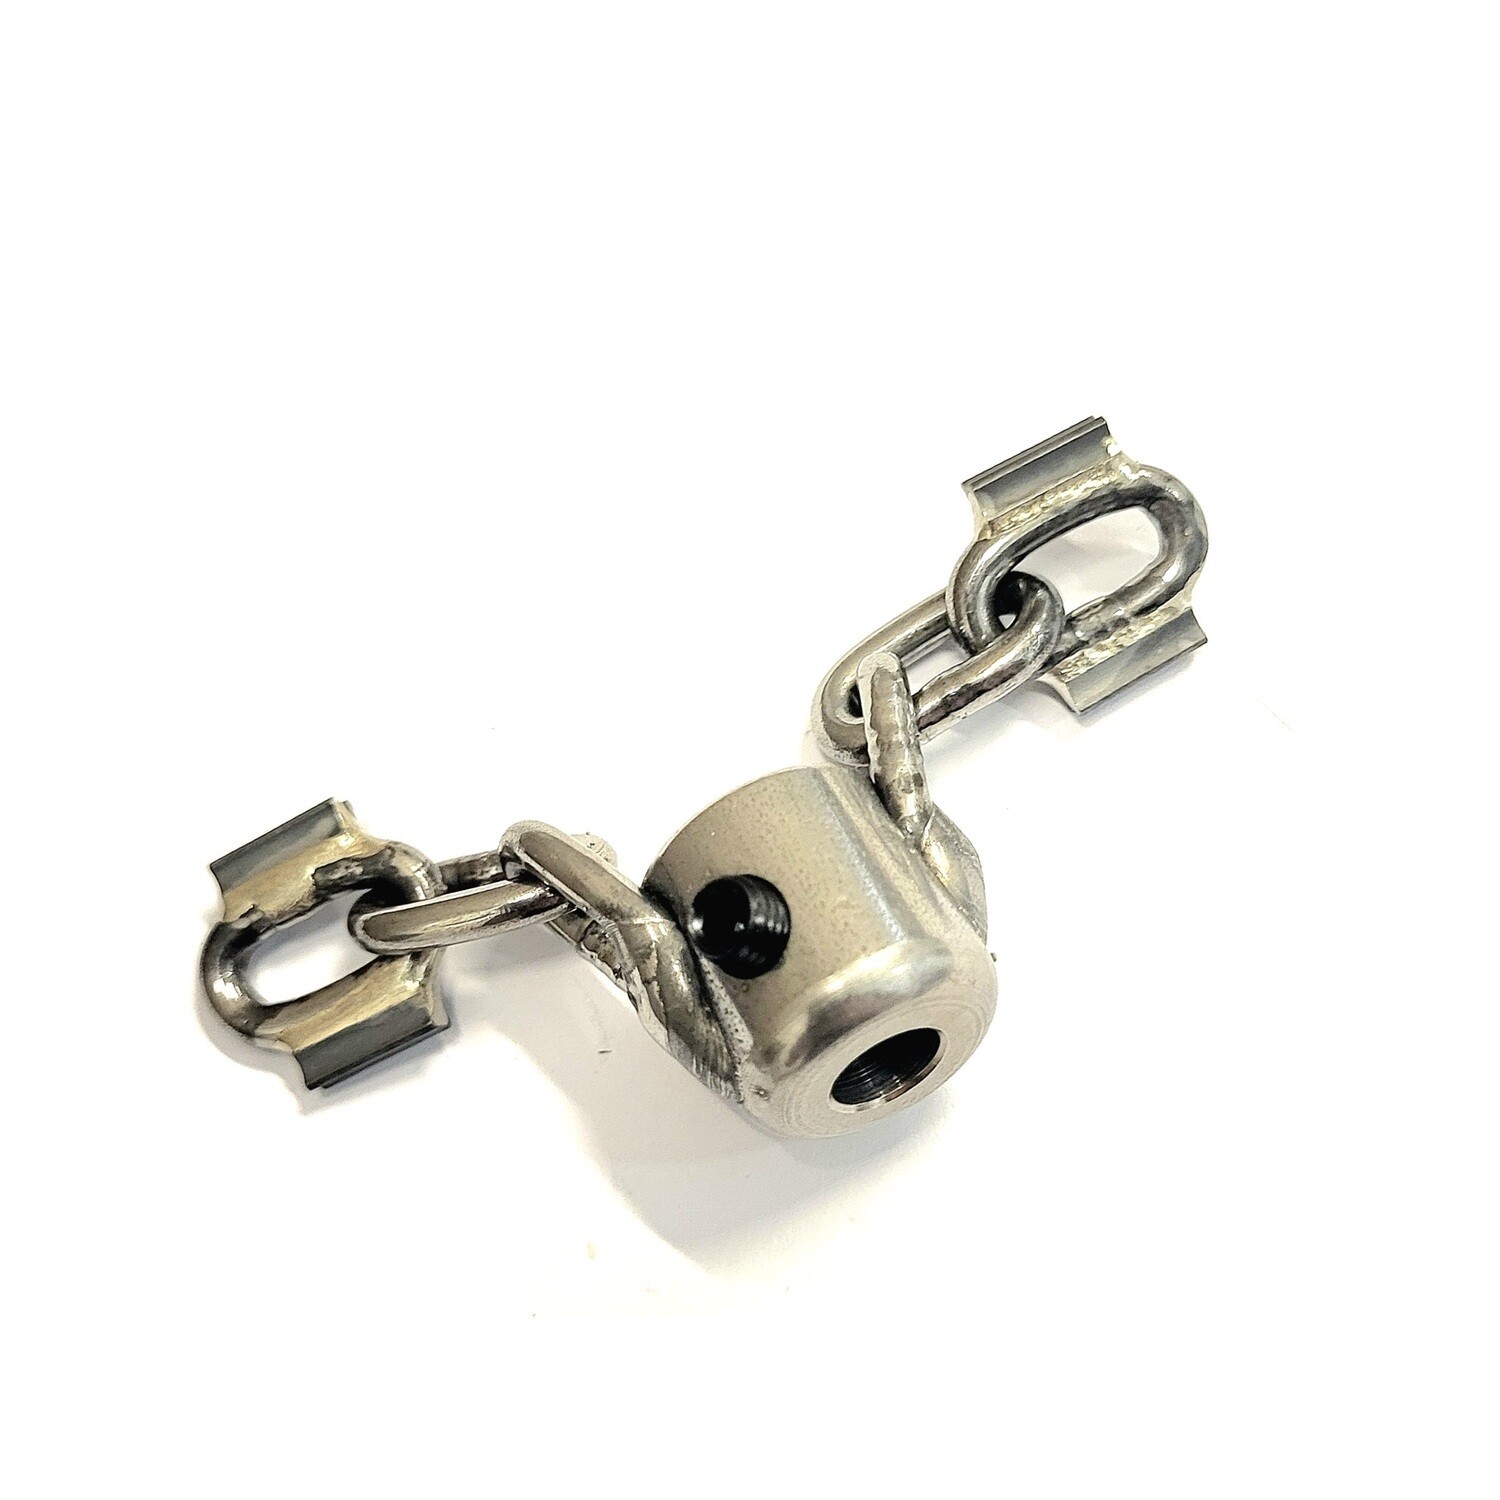 Mini Drain Chains mount onto a 6mm flexshaft and are meant for smaller diameter pipes like boiler cleaning and cleaning toilet pipes with a toilet snake or plumber cable